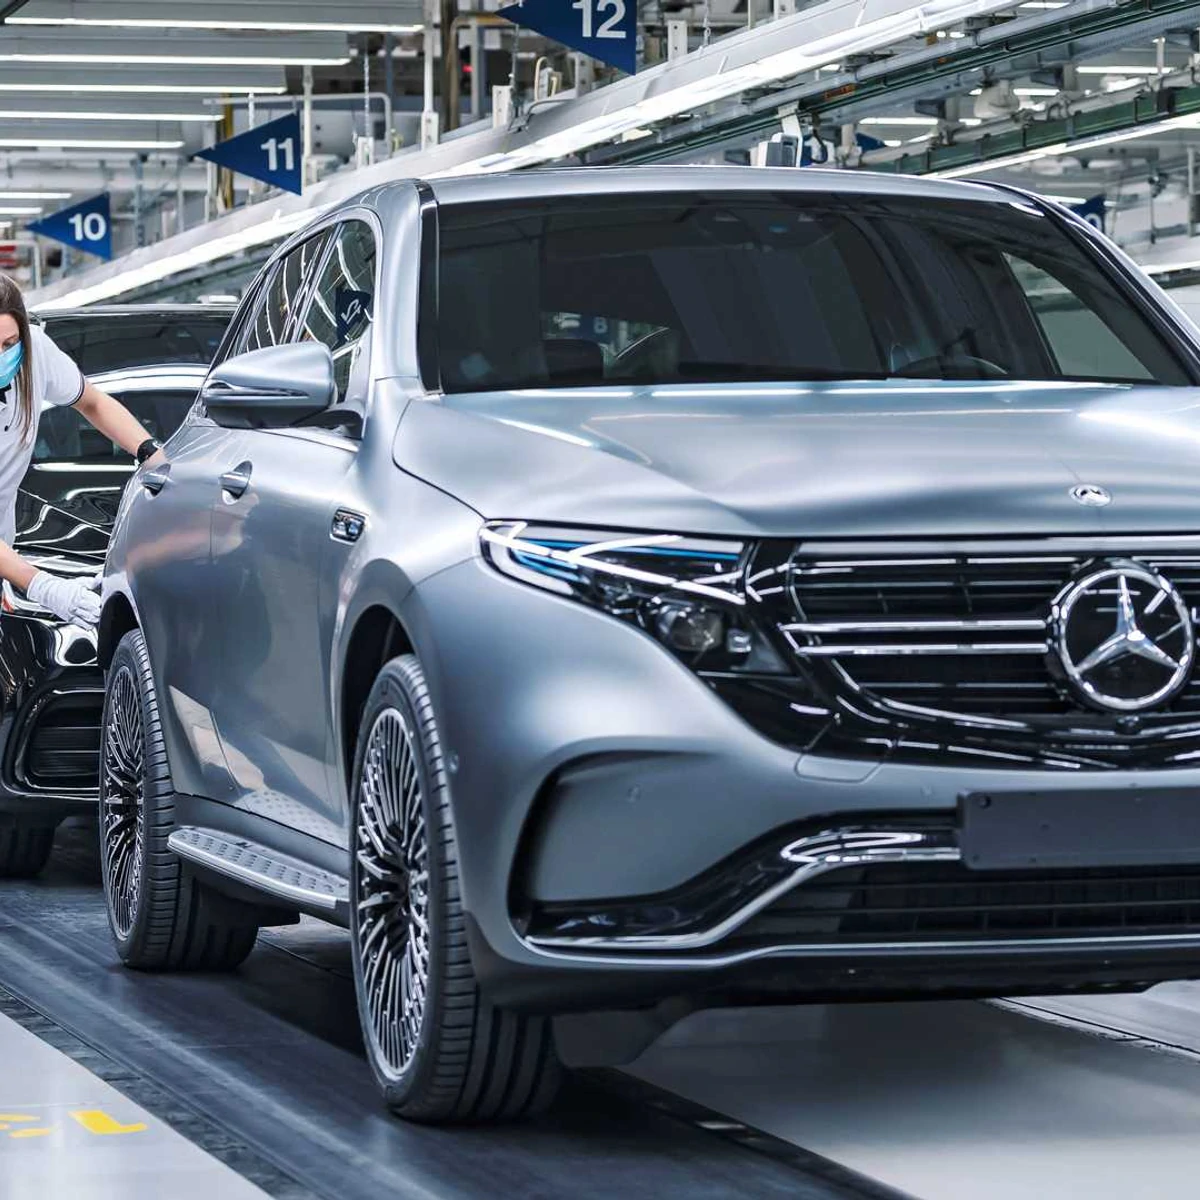 Mercedes Benz battery systems production line for Mercedes EQC